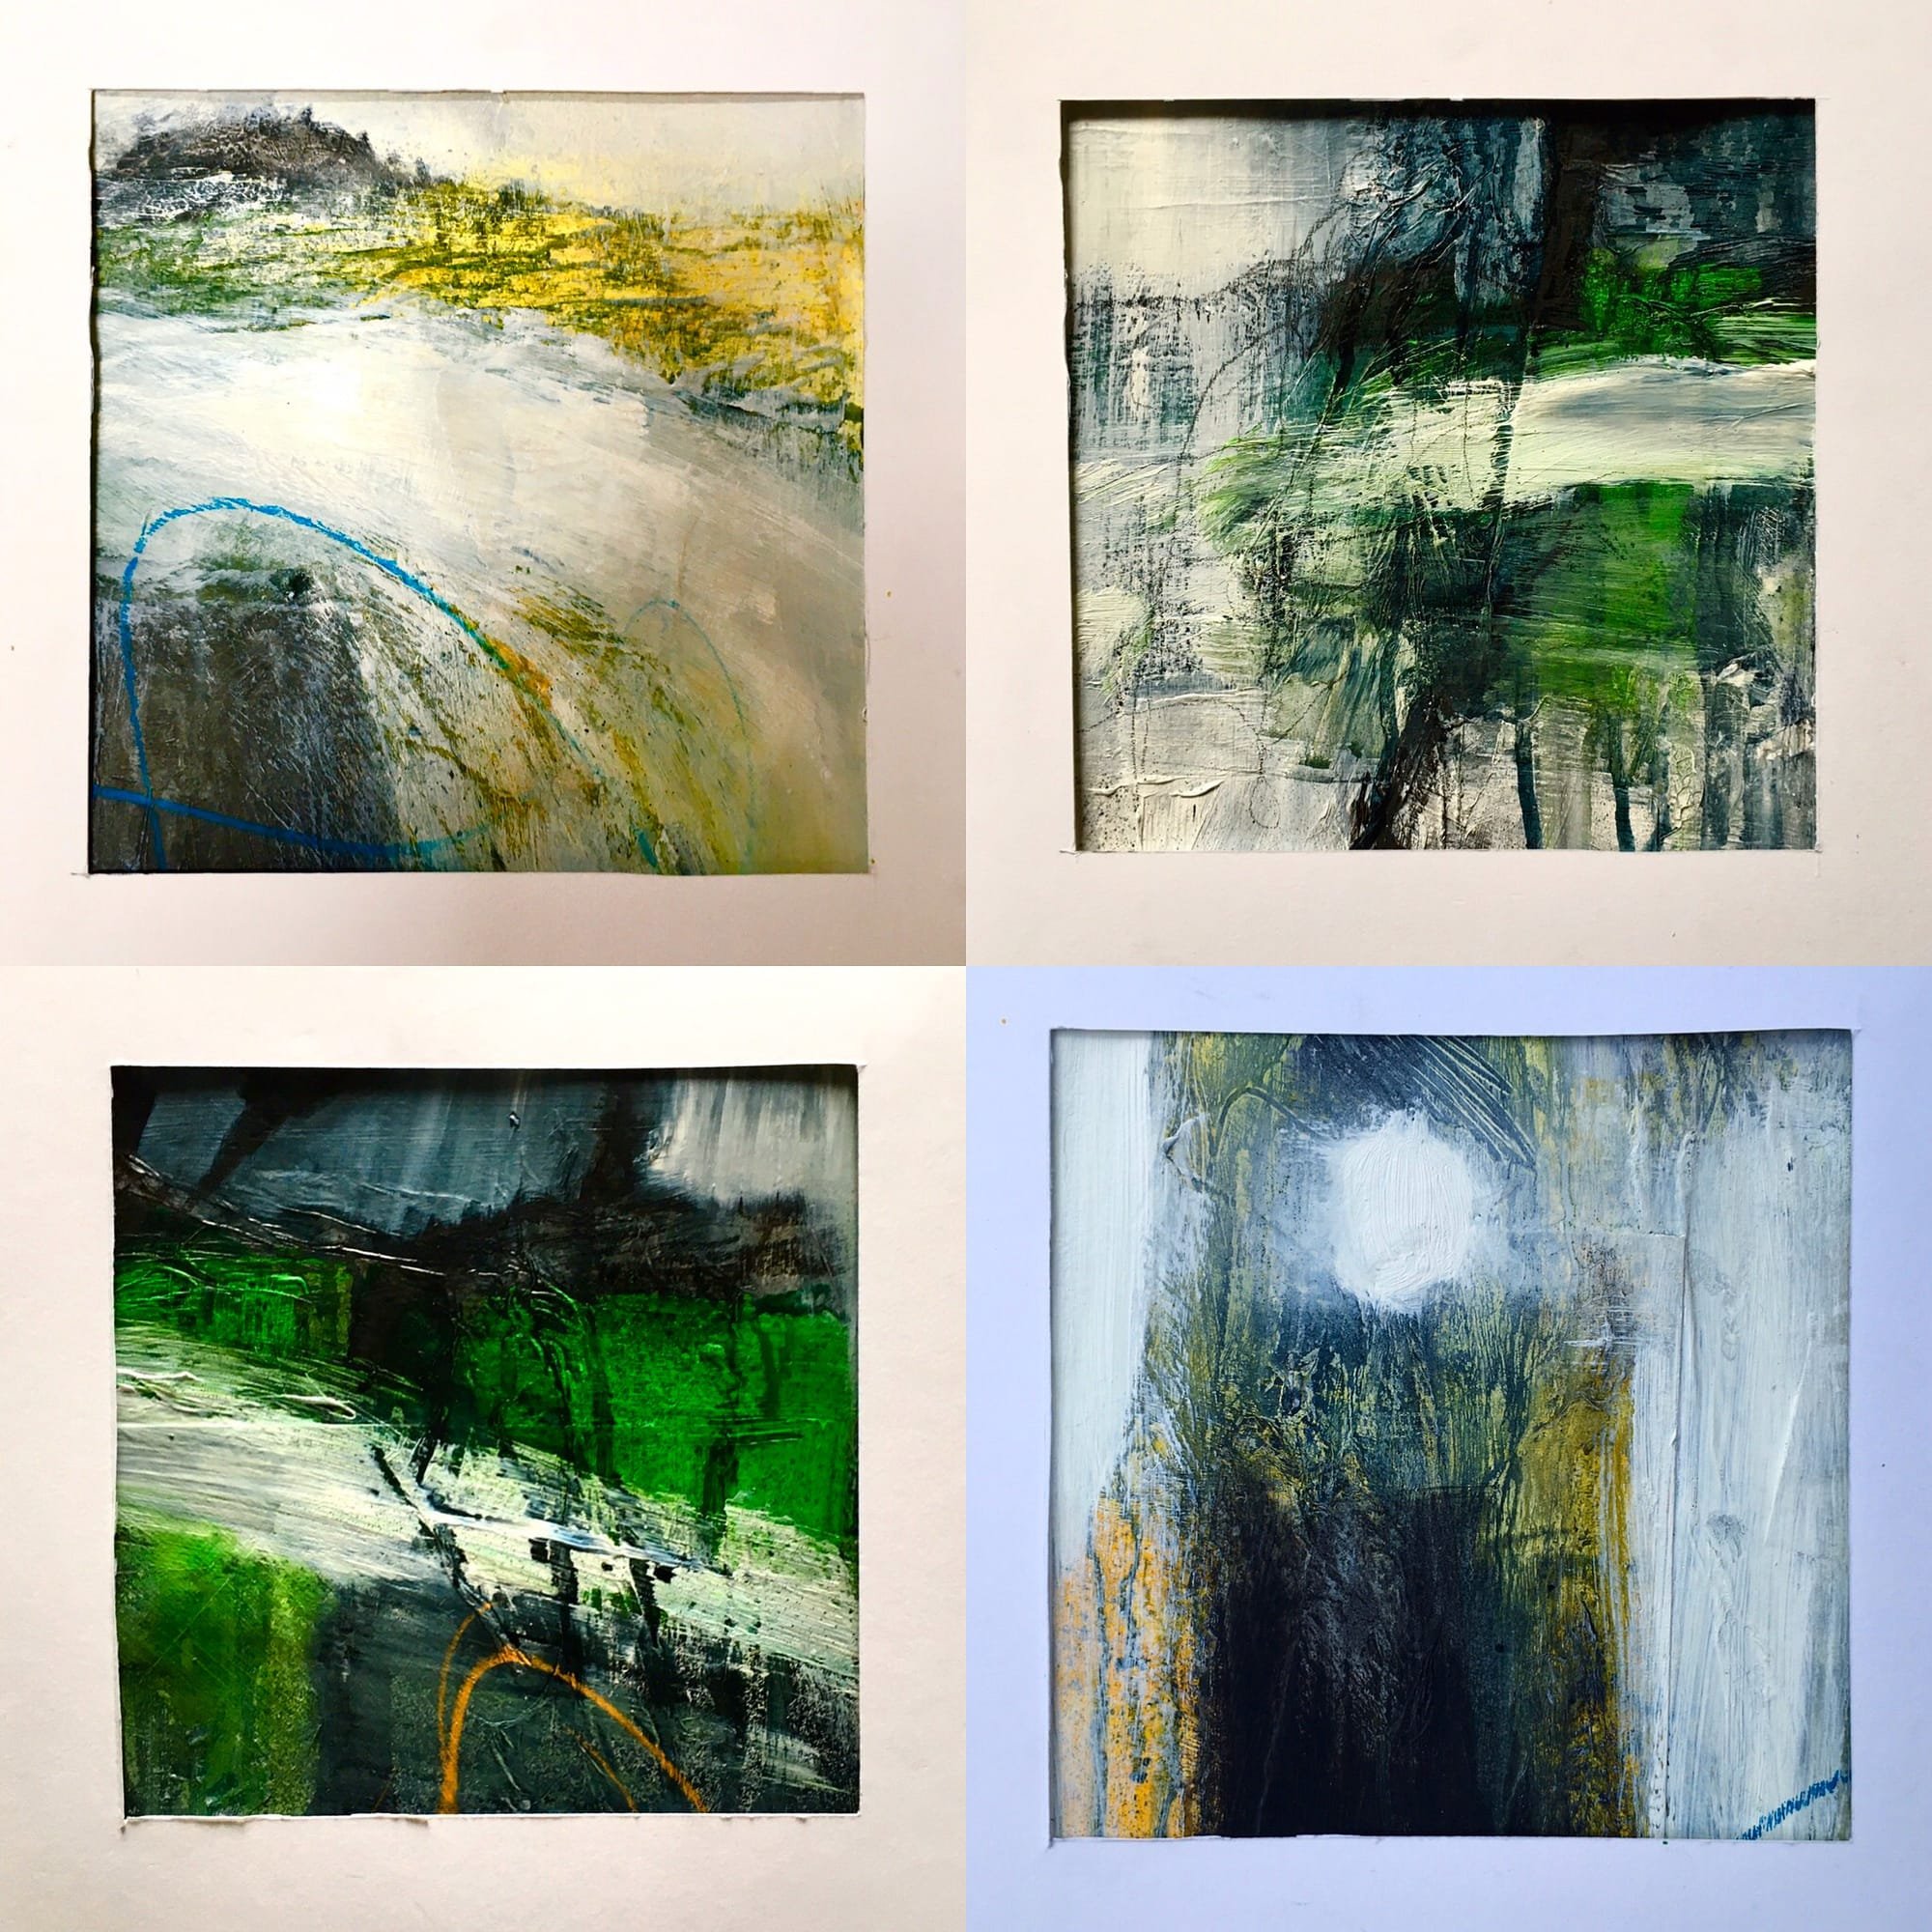 4 Field Sketches